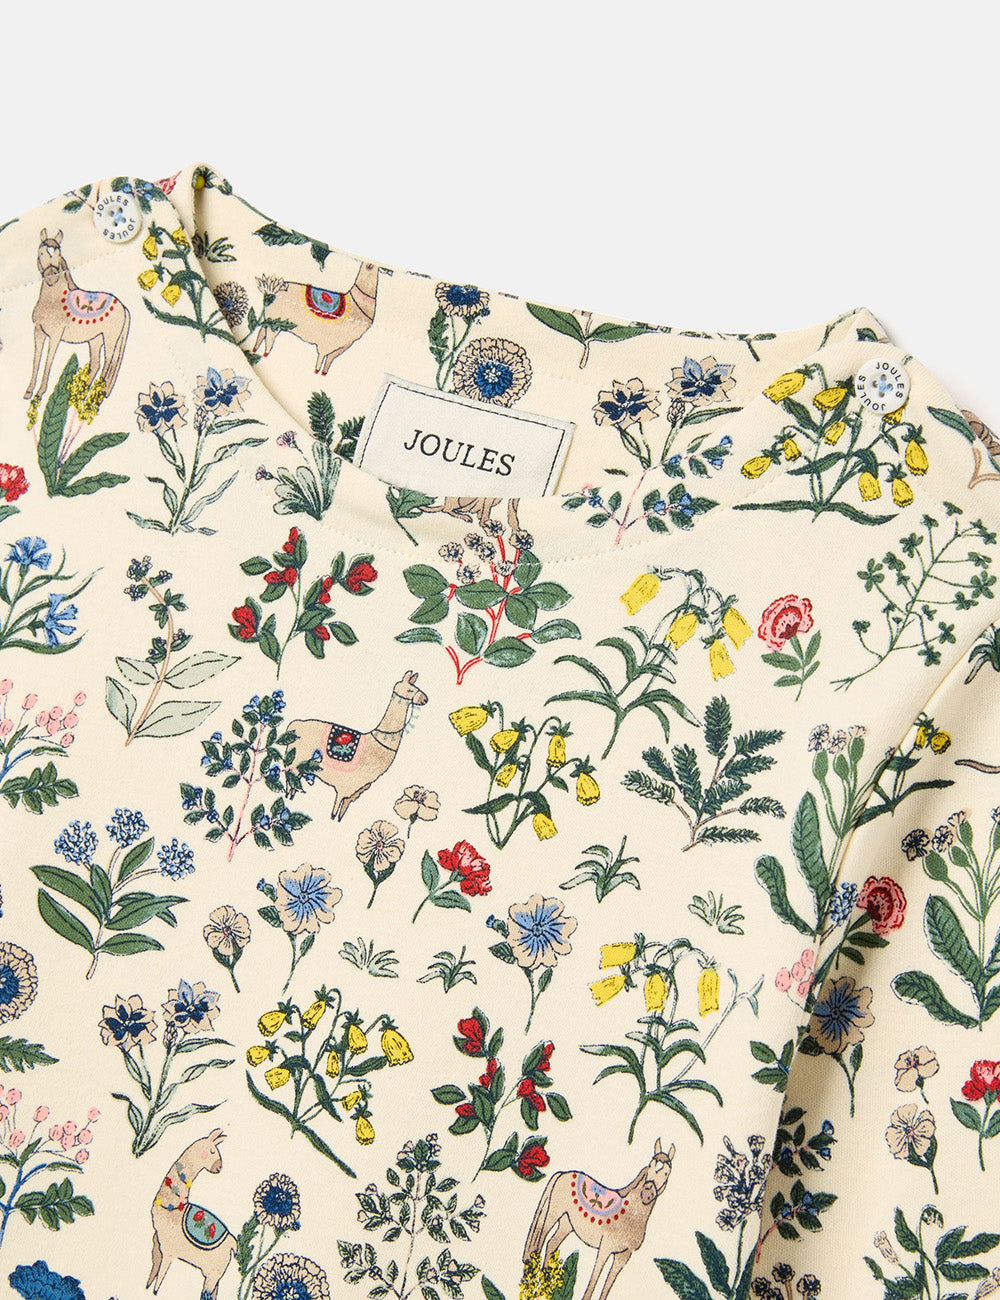 Joules Harbour Long Sleeve T-Shirt - Cream Animal Floral